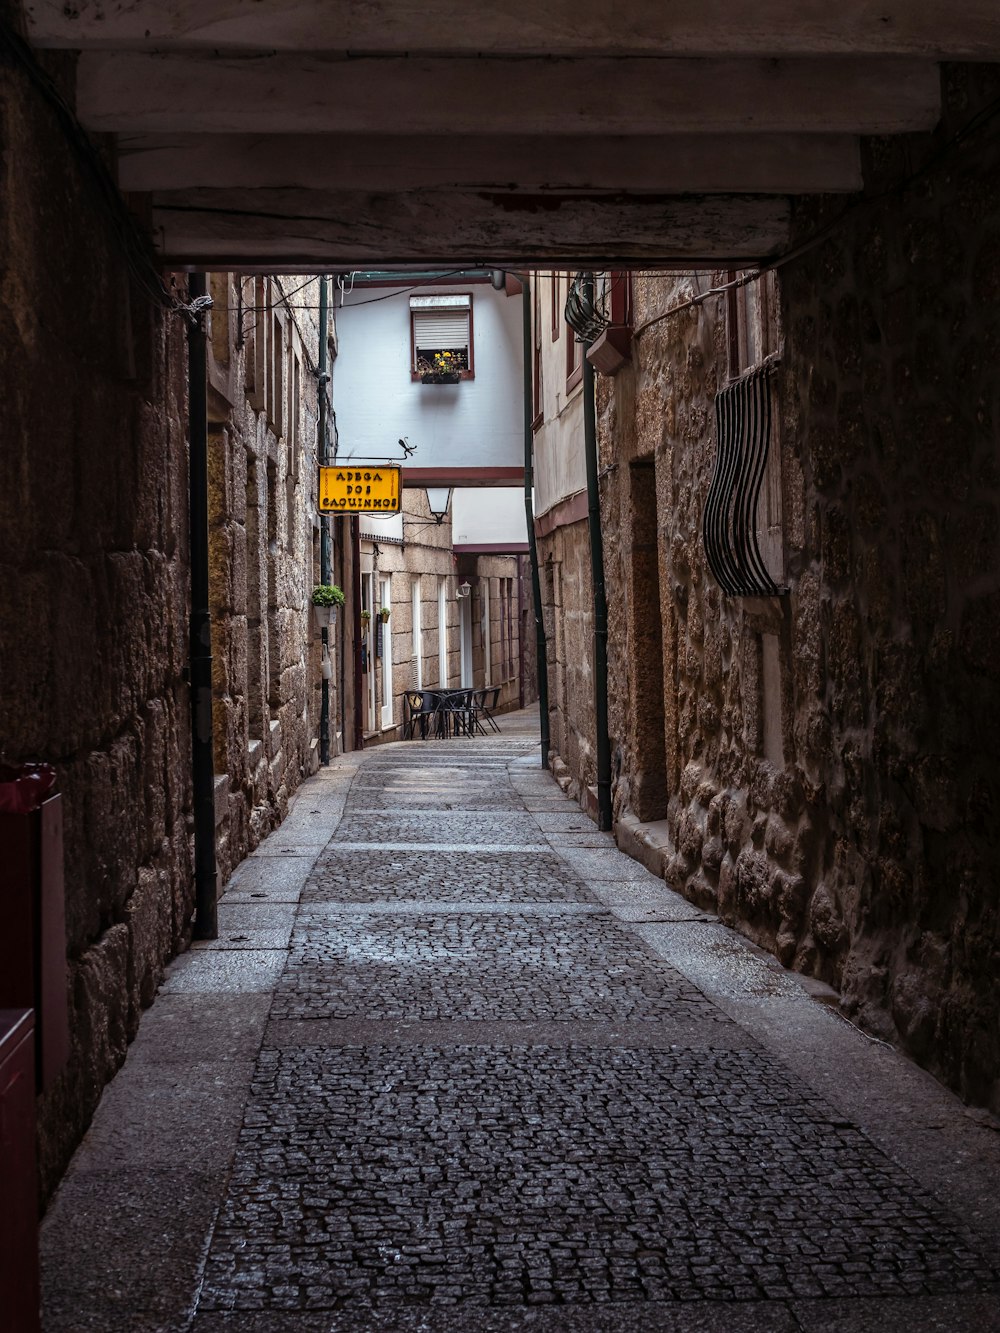 a narrow alley way with a yellow sign hanging from the ceiling